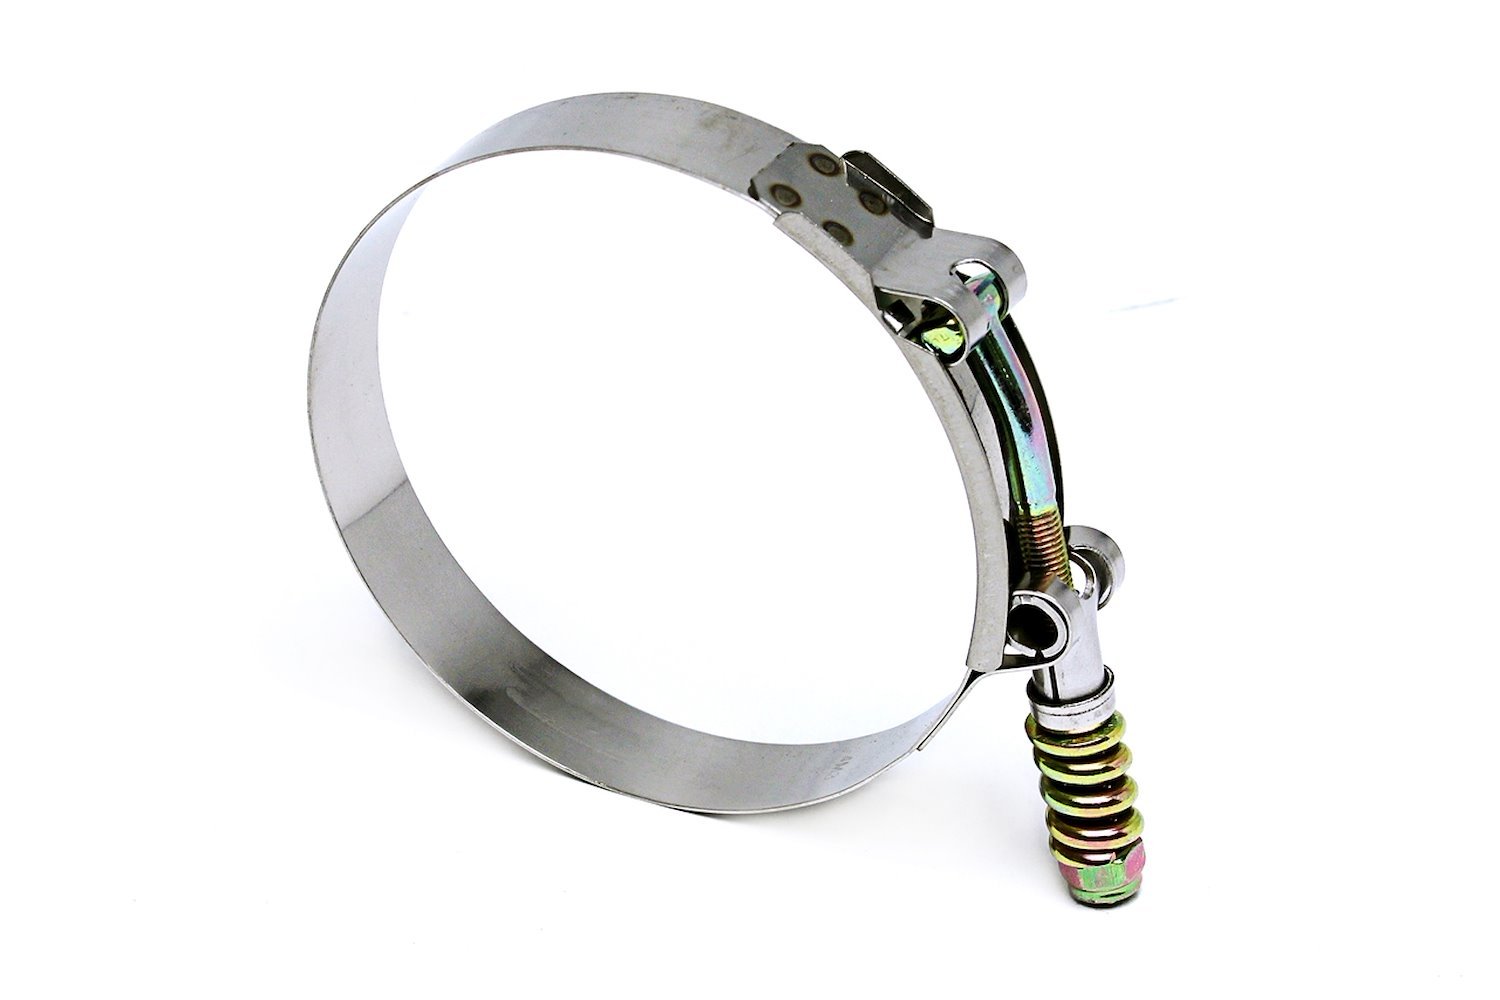 SLTC-625 Stainless Steel Spring Loaded T-Bolt Hose Clamp, Size #172, Range: 6.26 in.-6.57 in.